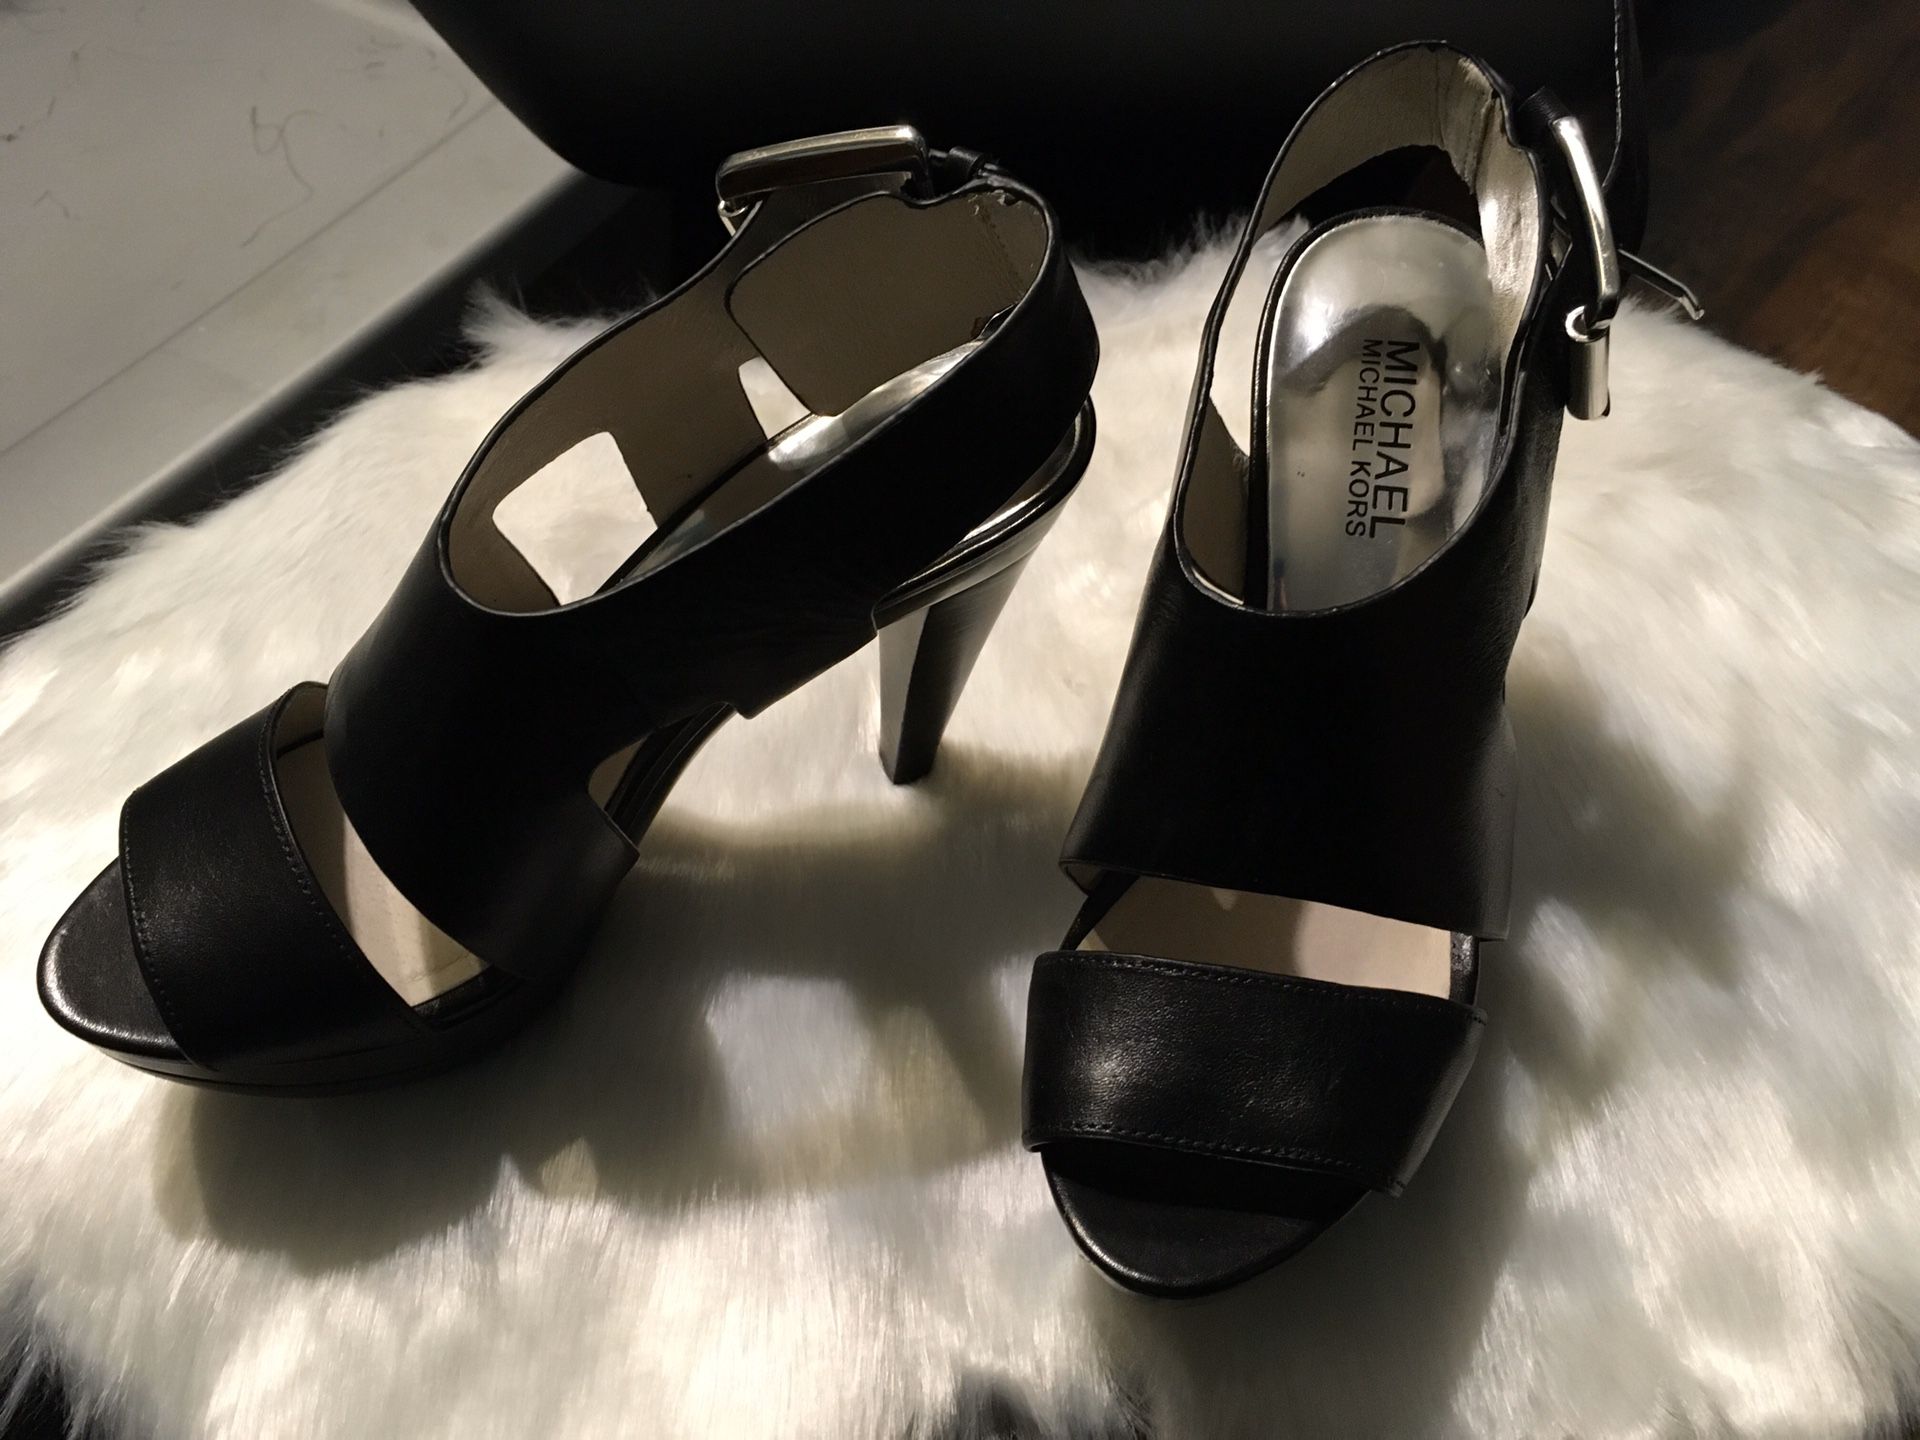 Michael Kors leather platform, only tried on, never worn outside, in box size 6